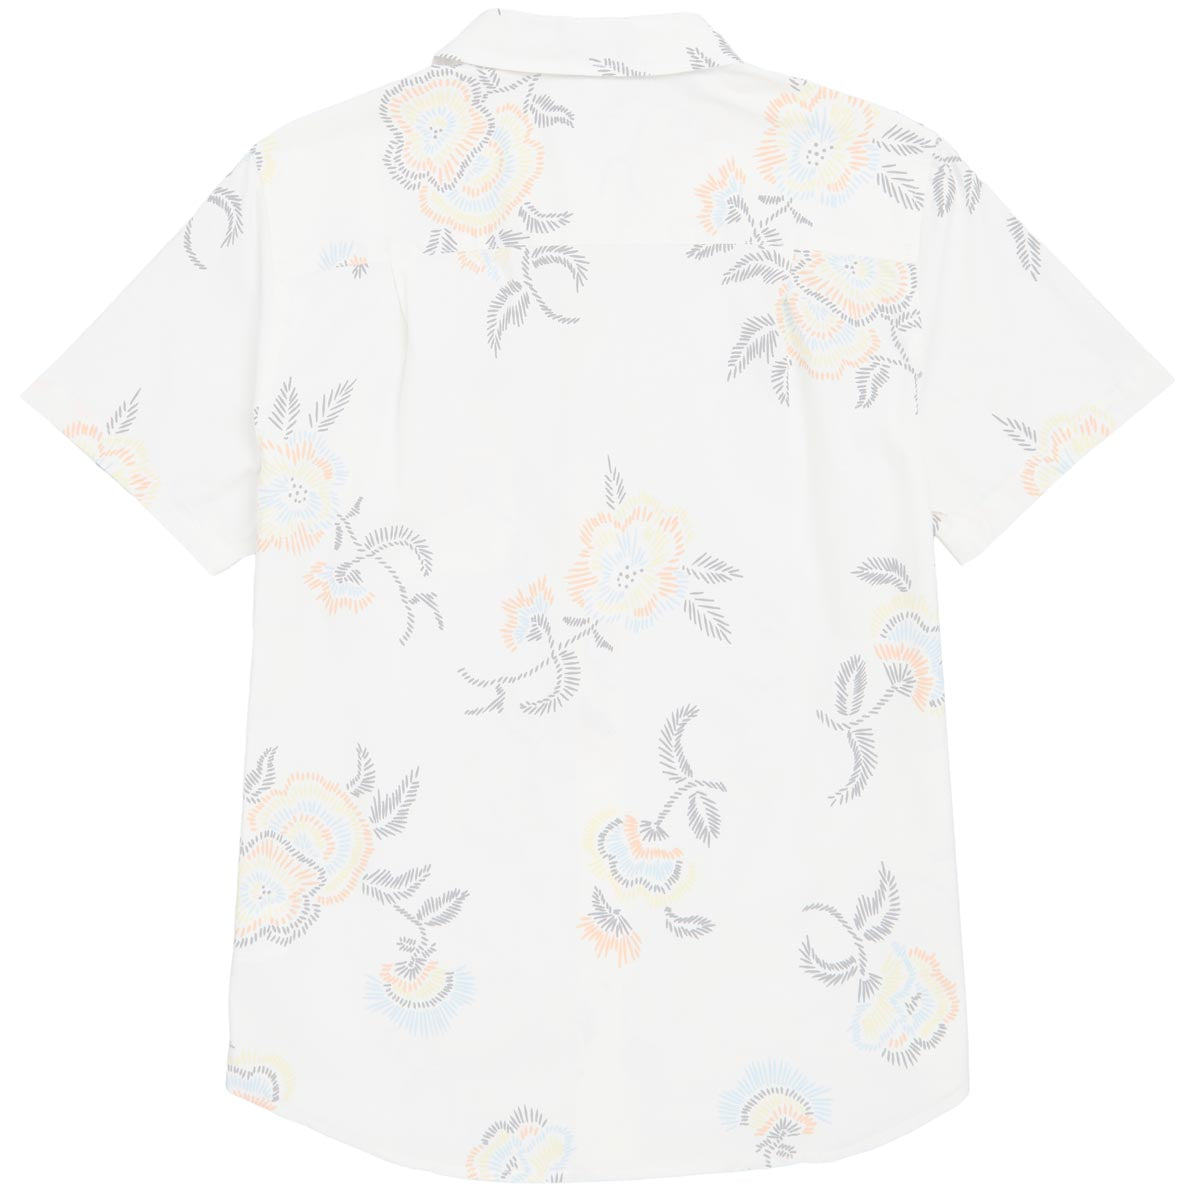 Brixton Charter Shirt - White Field Floral image 2